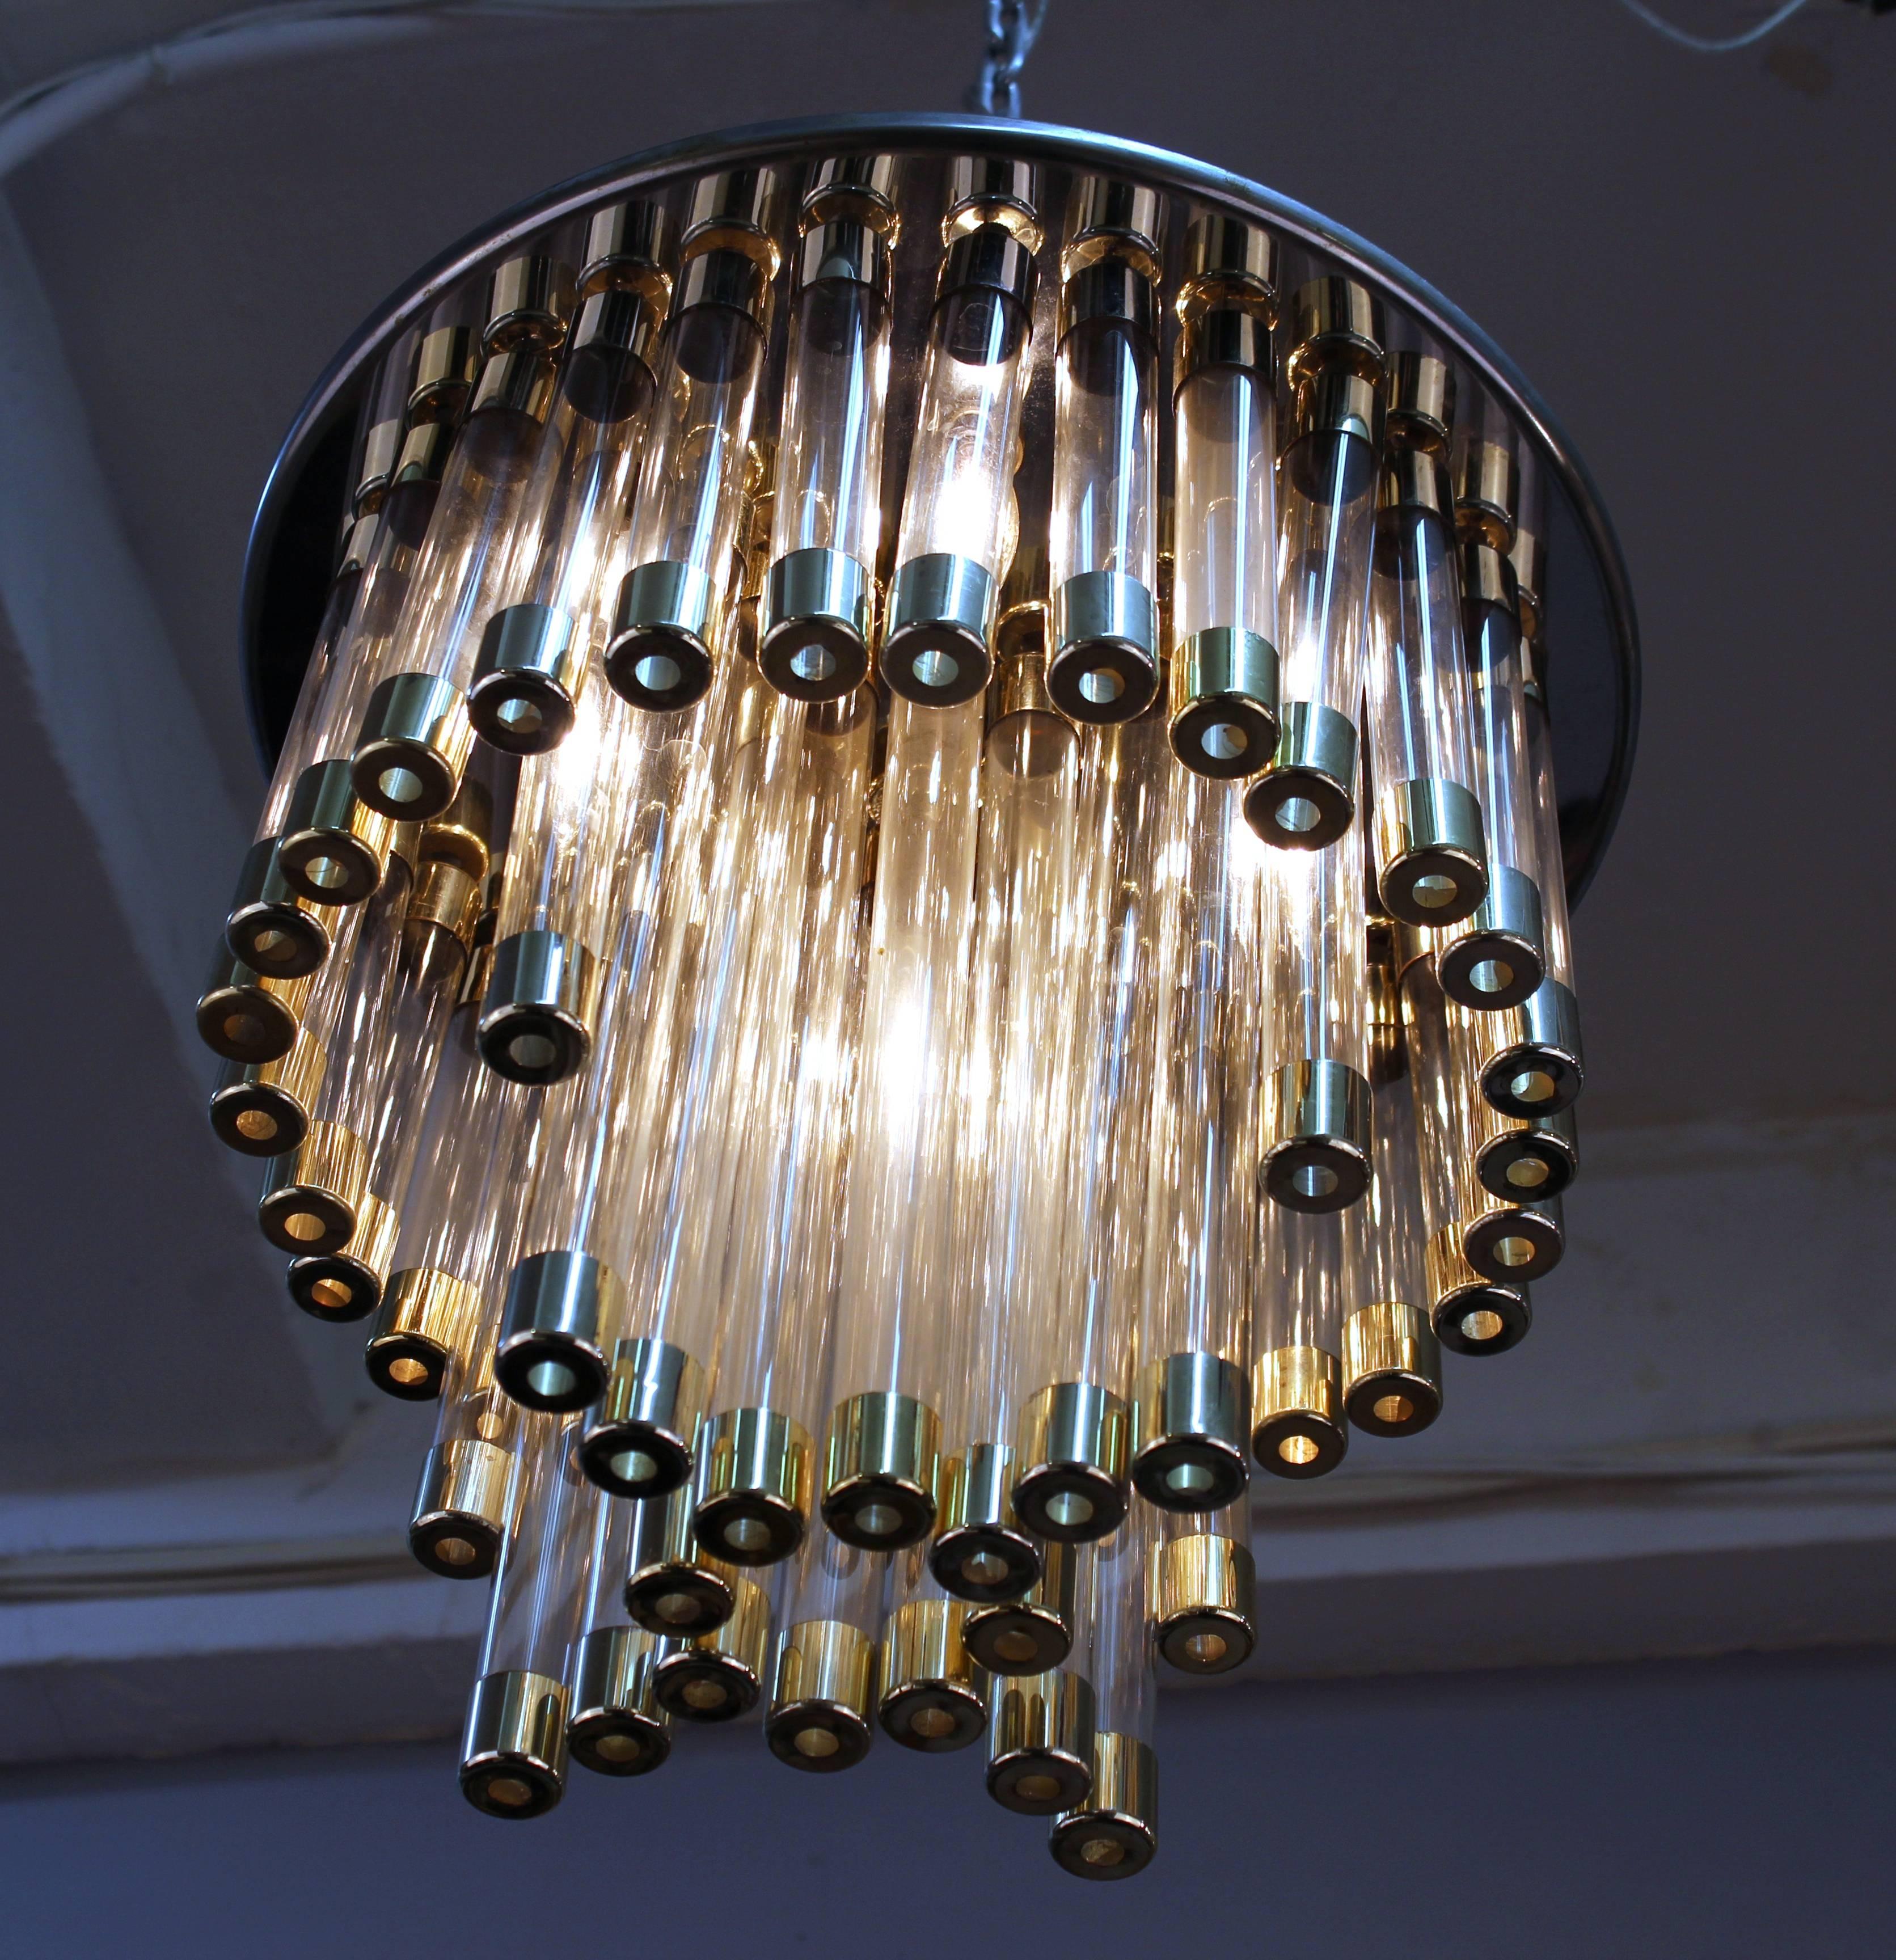 A Mid-Century Modern chandelier with chrome structure on a circular base with chrome and glass tube pendants. The piece is in good vintage condition and has been rewired to US standards.